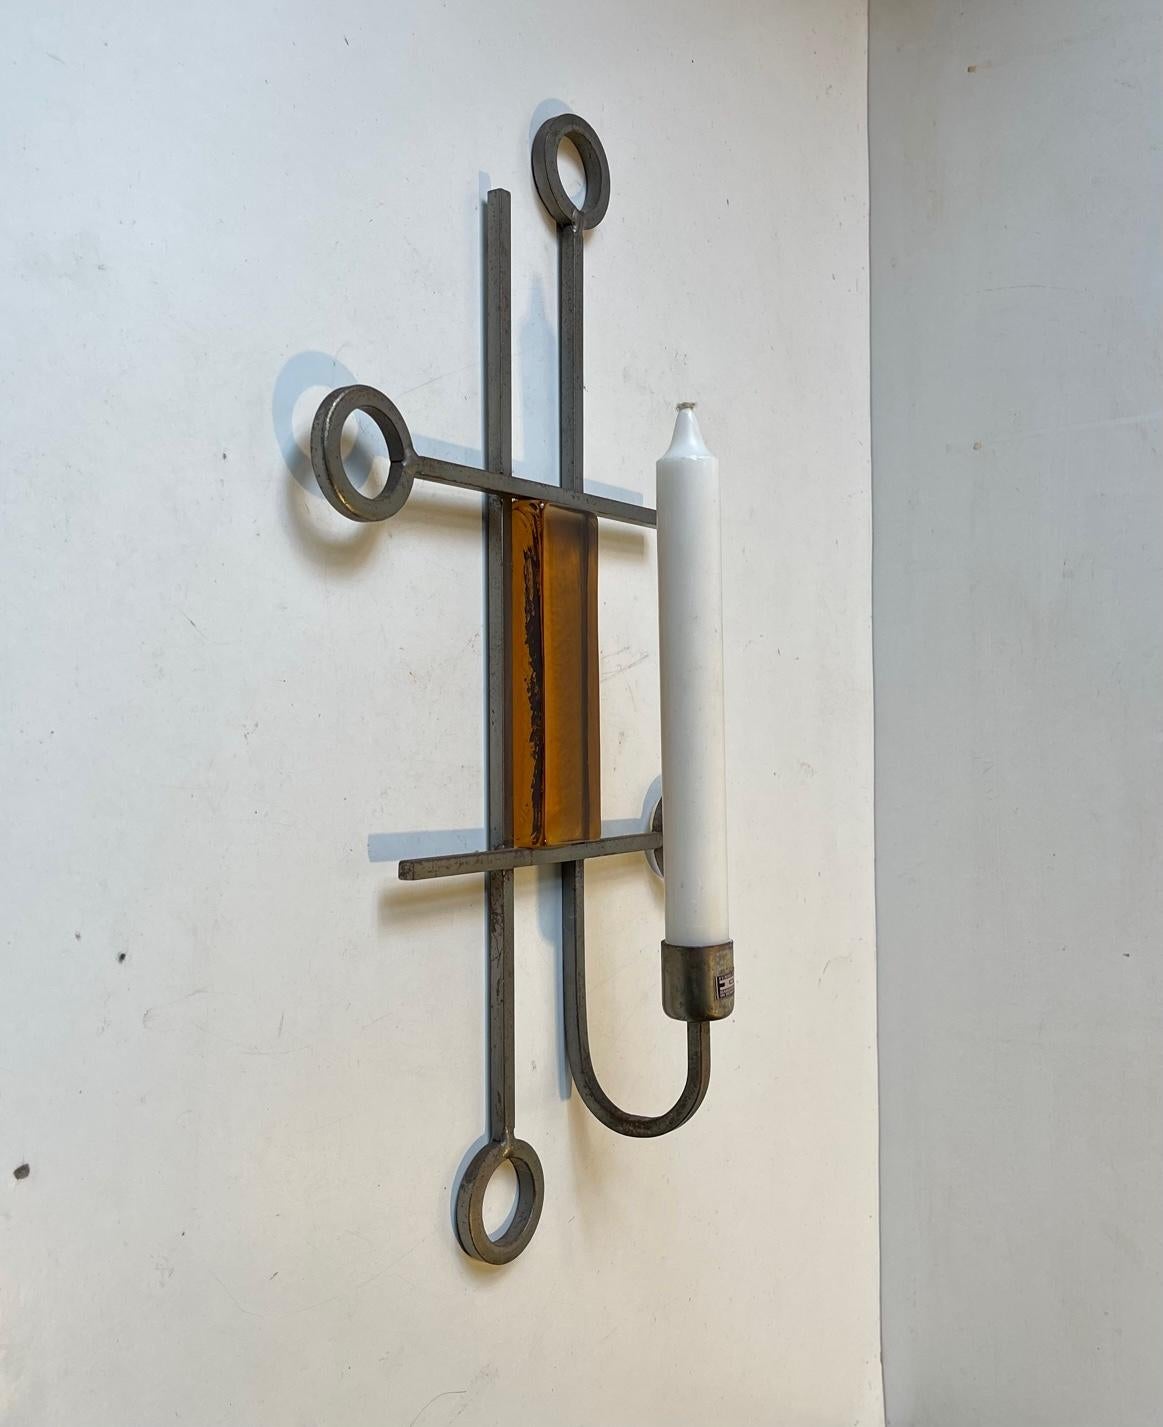 Vintage Modernist Iron & Glass Candle Sconce from Danish Ferro Art, 1970s For Sale 3